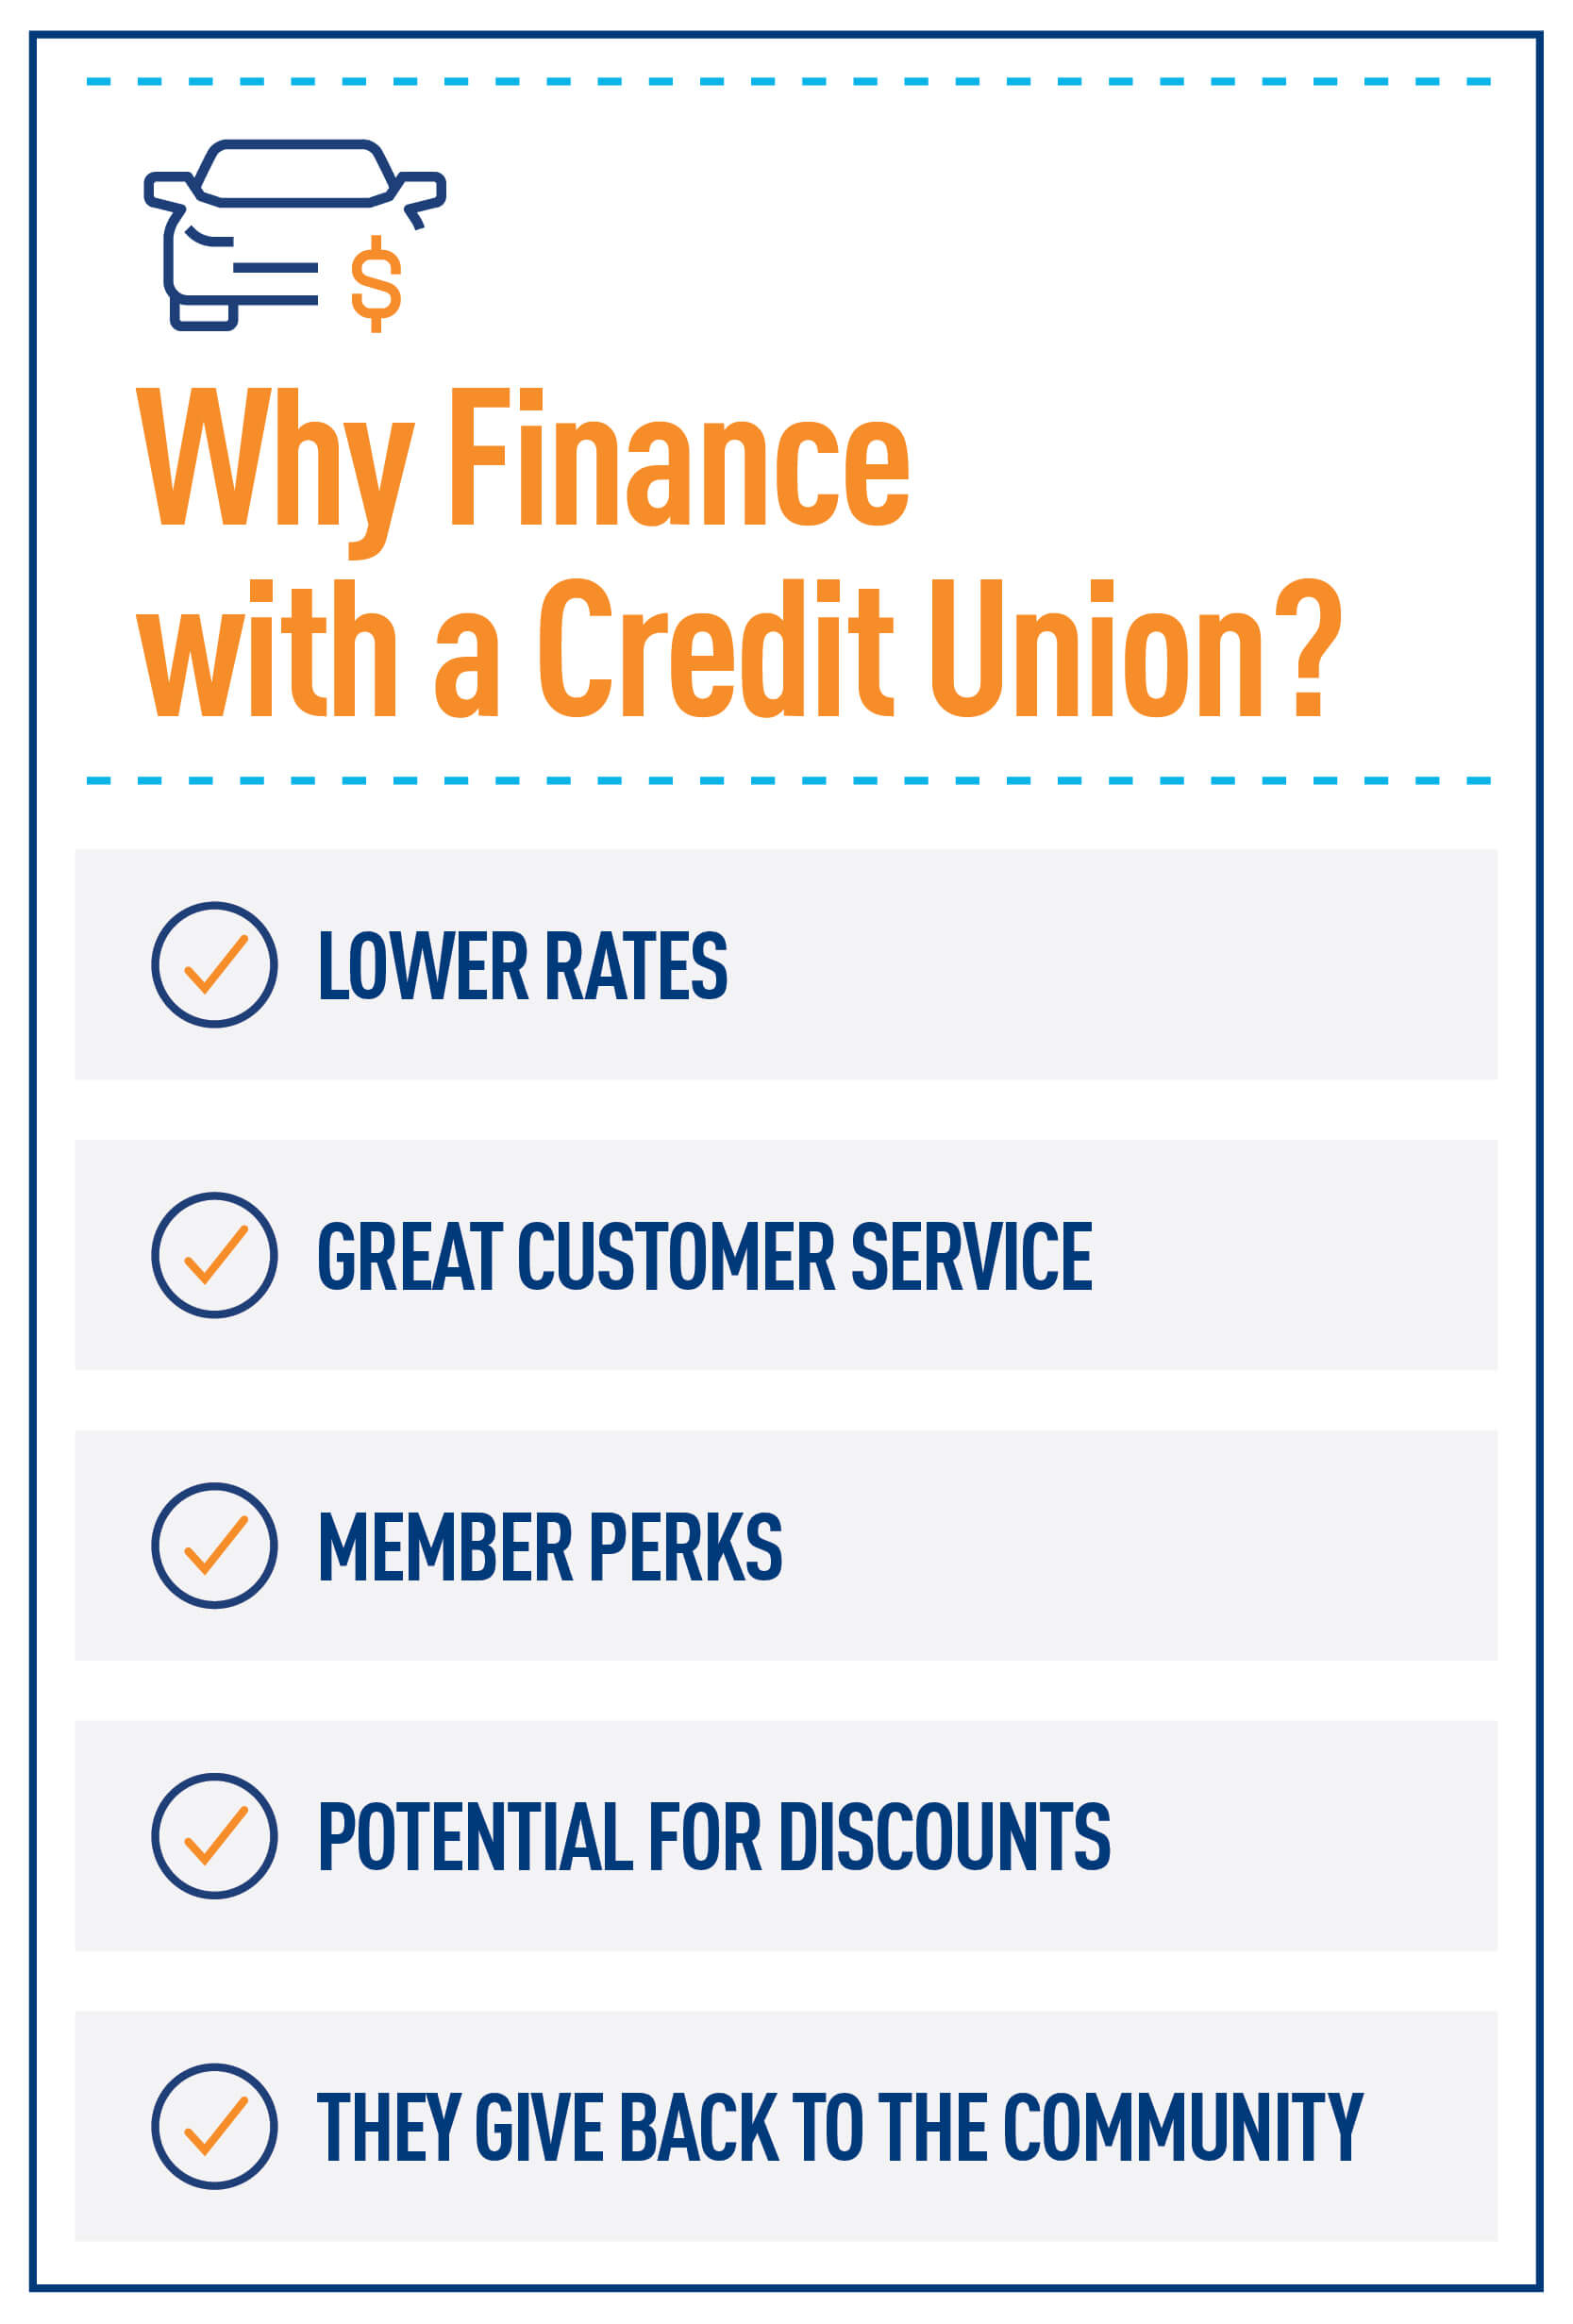 Why finance with a credit union